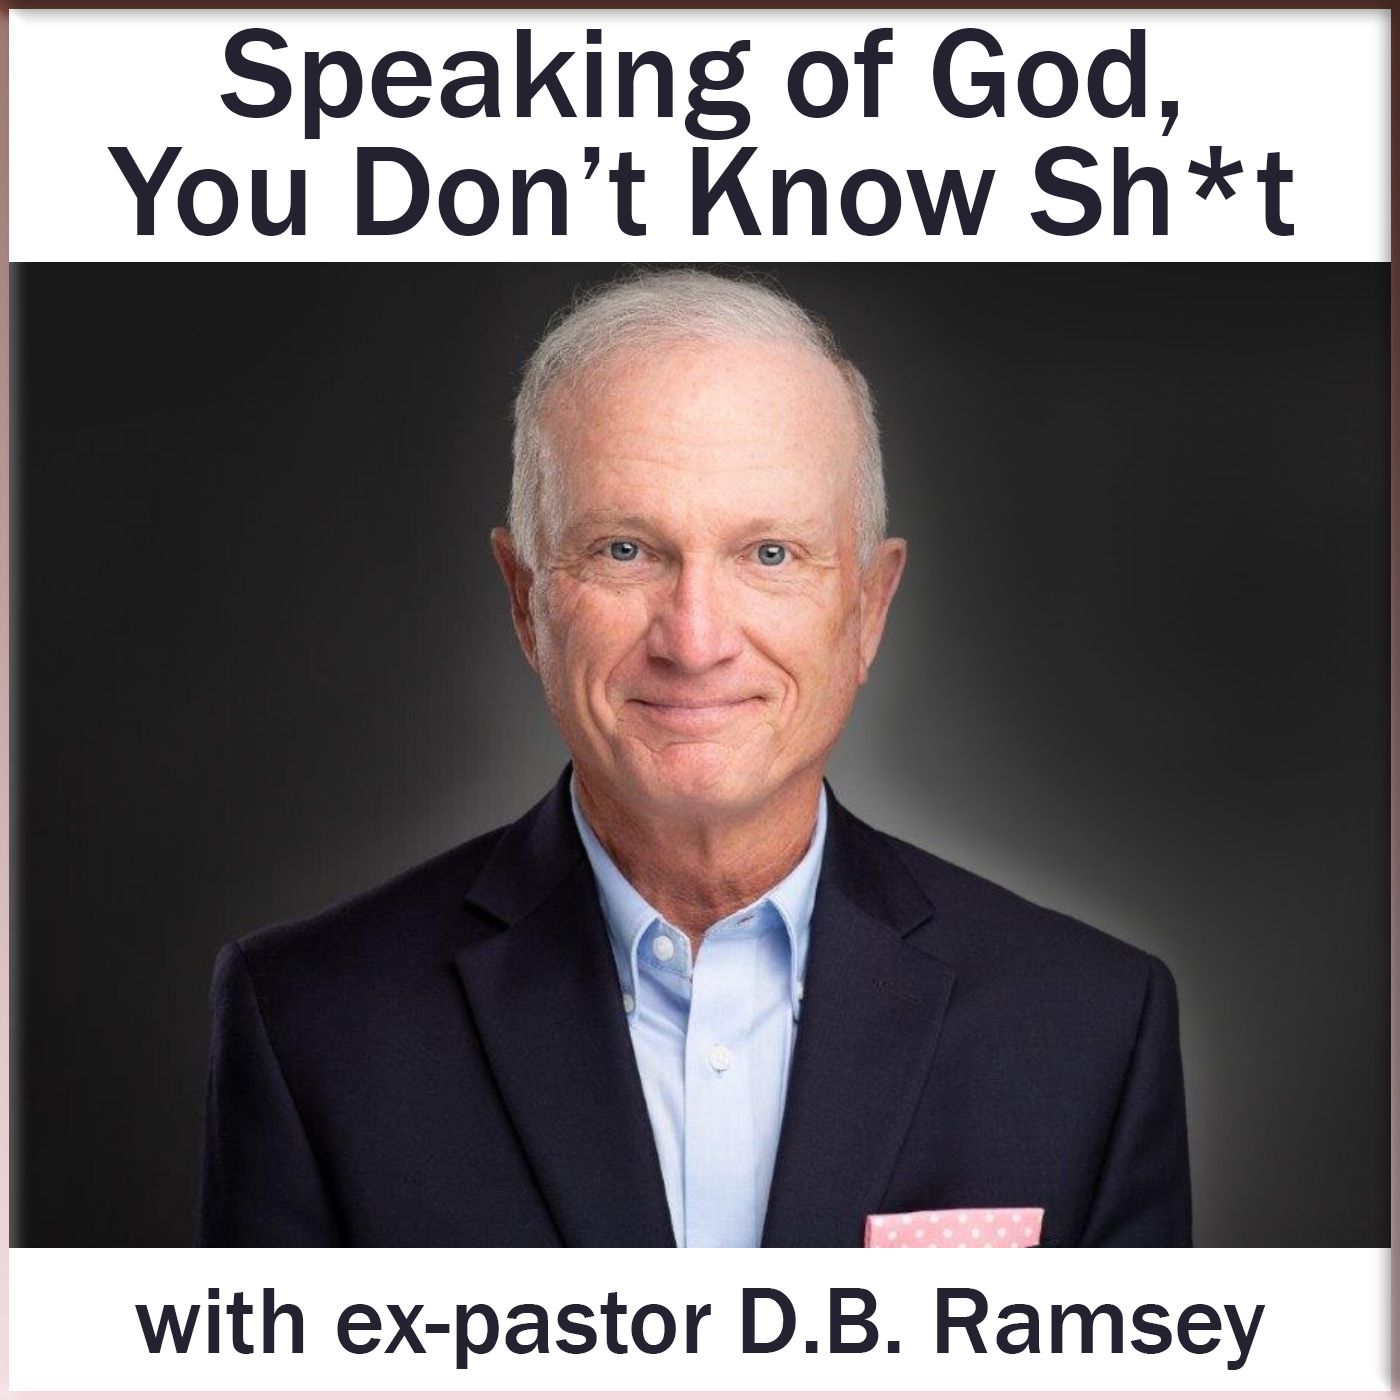 Speaking of God, We Don’t Know Sh*t” (with ex-pastor D.B. Ramsey)